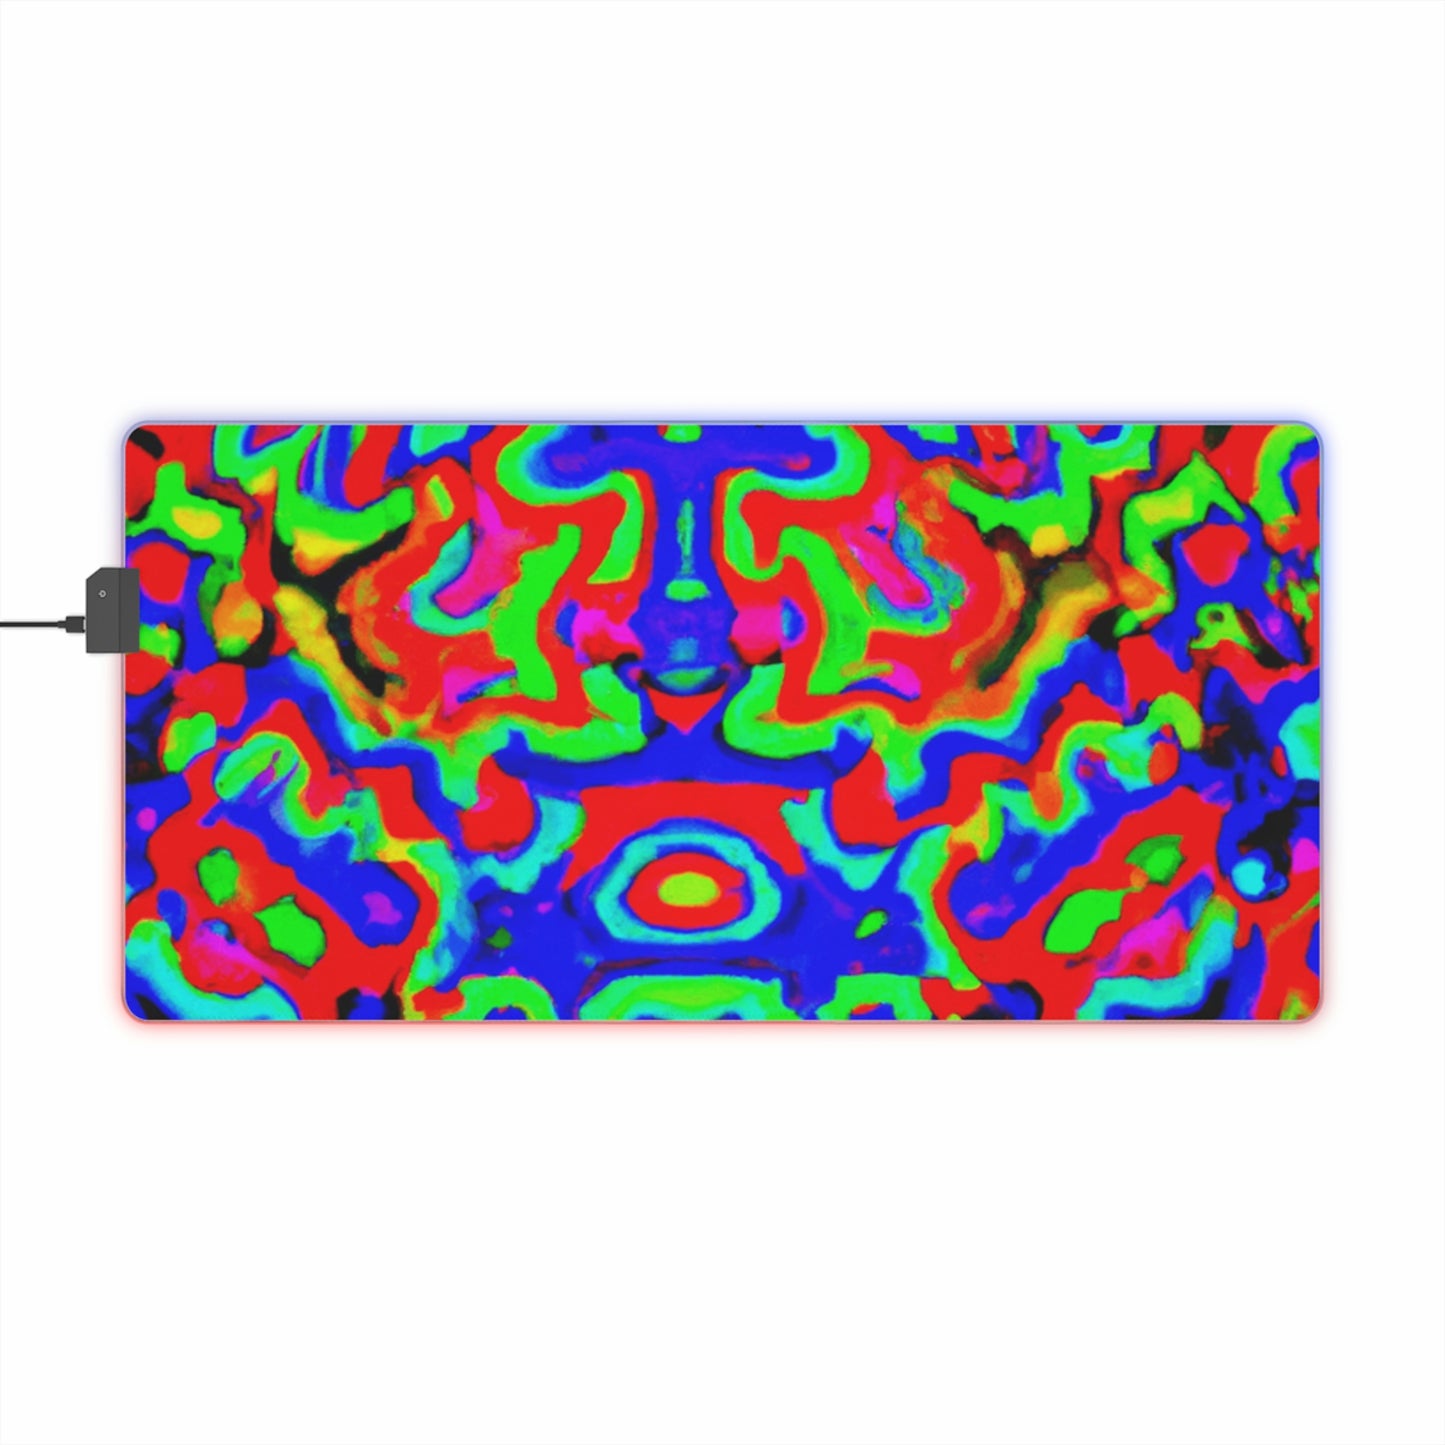 Rocko "The Robot" Rutherford - Psychedelic Trippy LED Light Up Gaming Mouse Pad